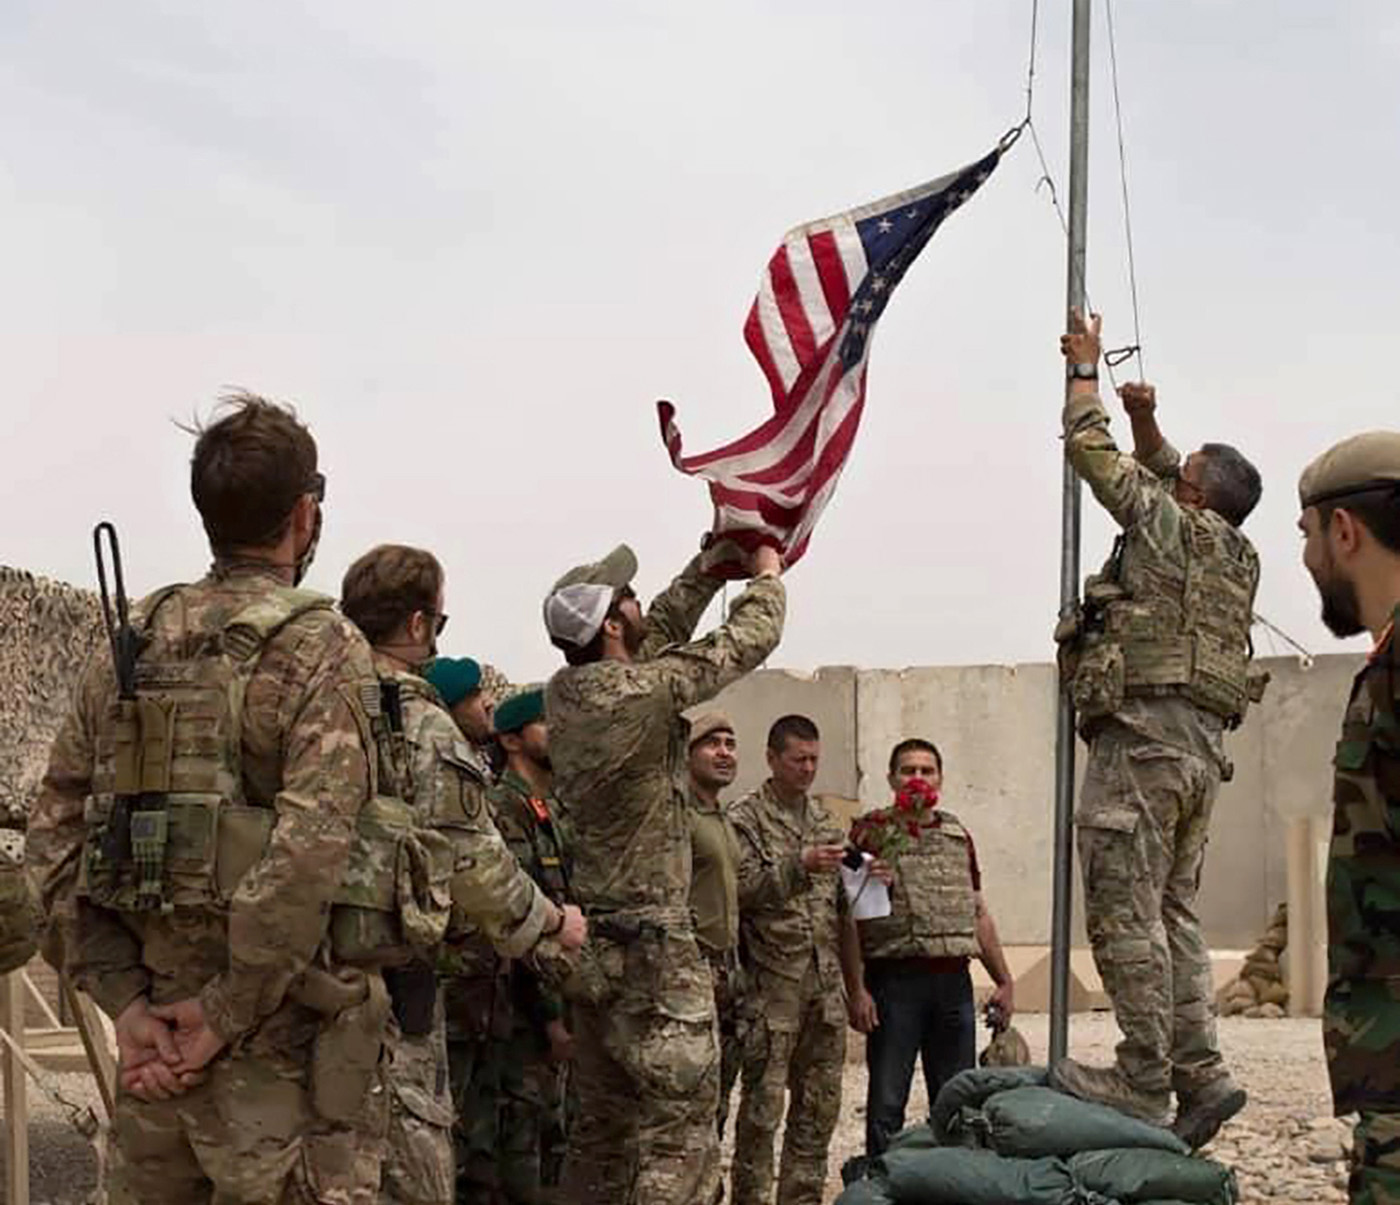 PHOTO: A U.S. flag is lowered as American and Afghan soldiers attend a handover ceremony from the U.S. Army to the Afghan National Army, at Camp Anthonic, in Helmand province, southern Afghanistan, May 2, 2021.